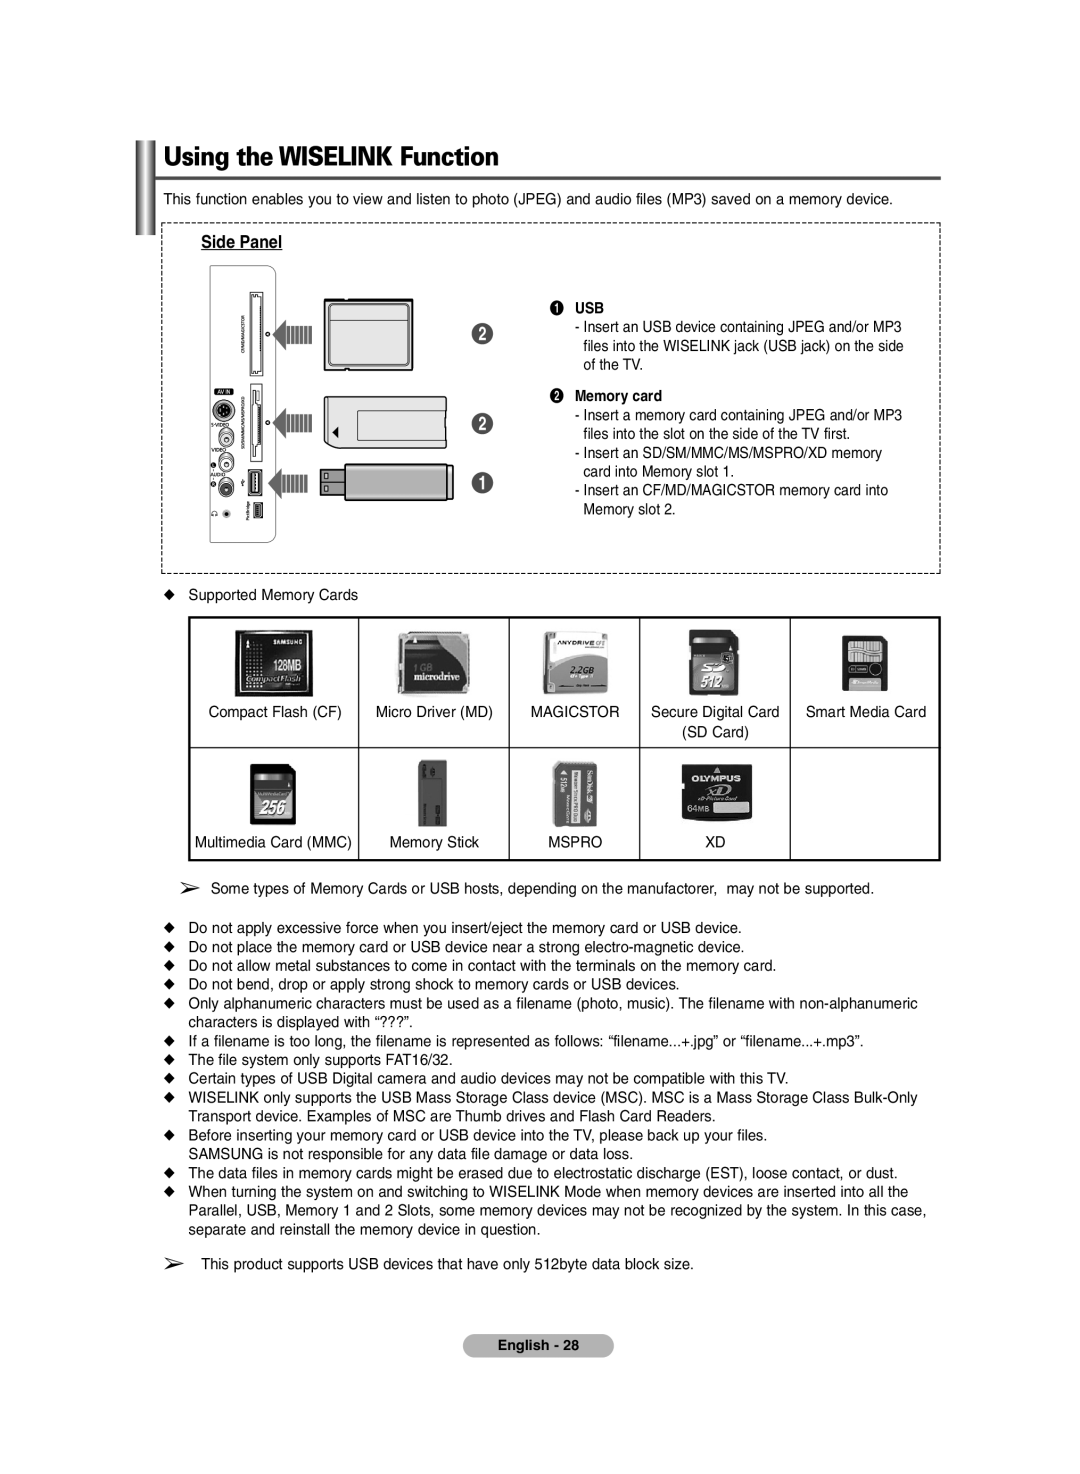 Samsung PDP-TELEVISION manual Using the WISELINK Function, Side Panel 